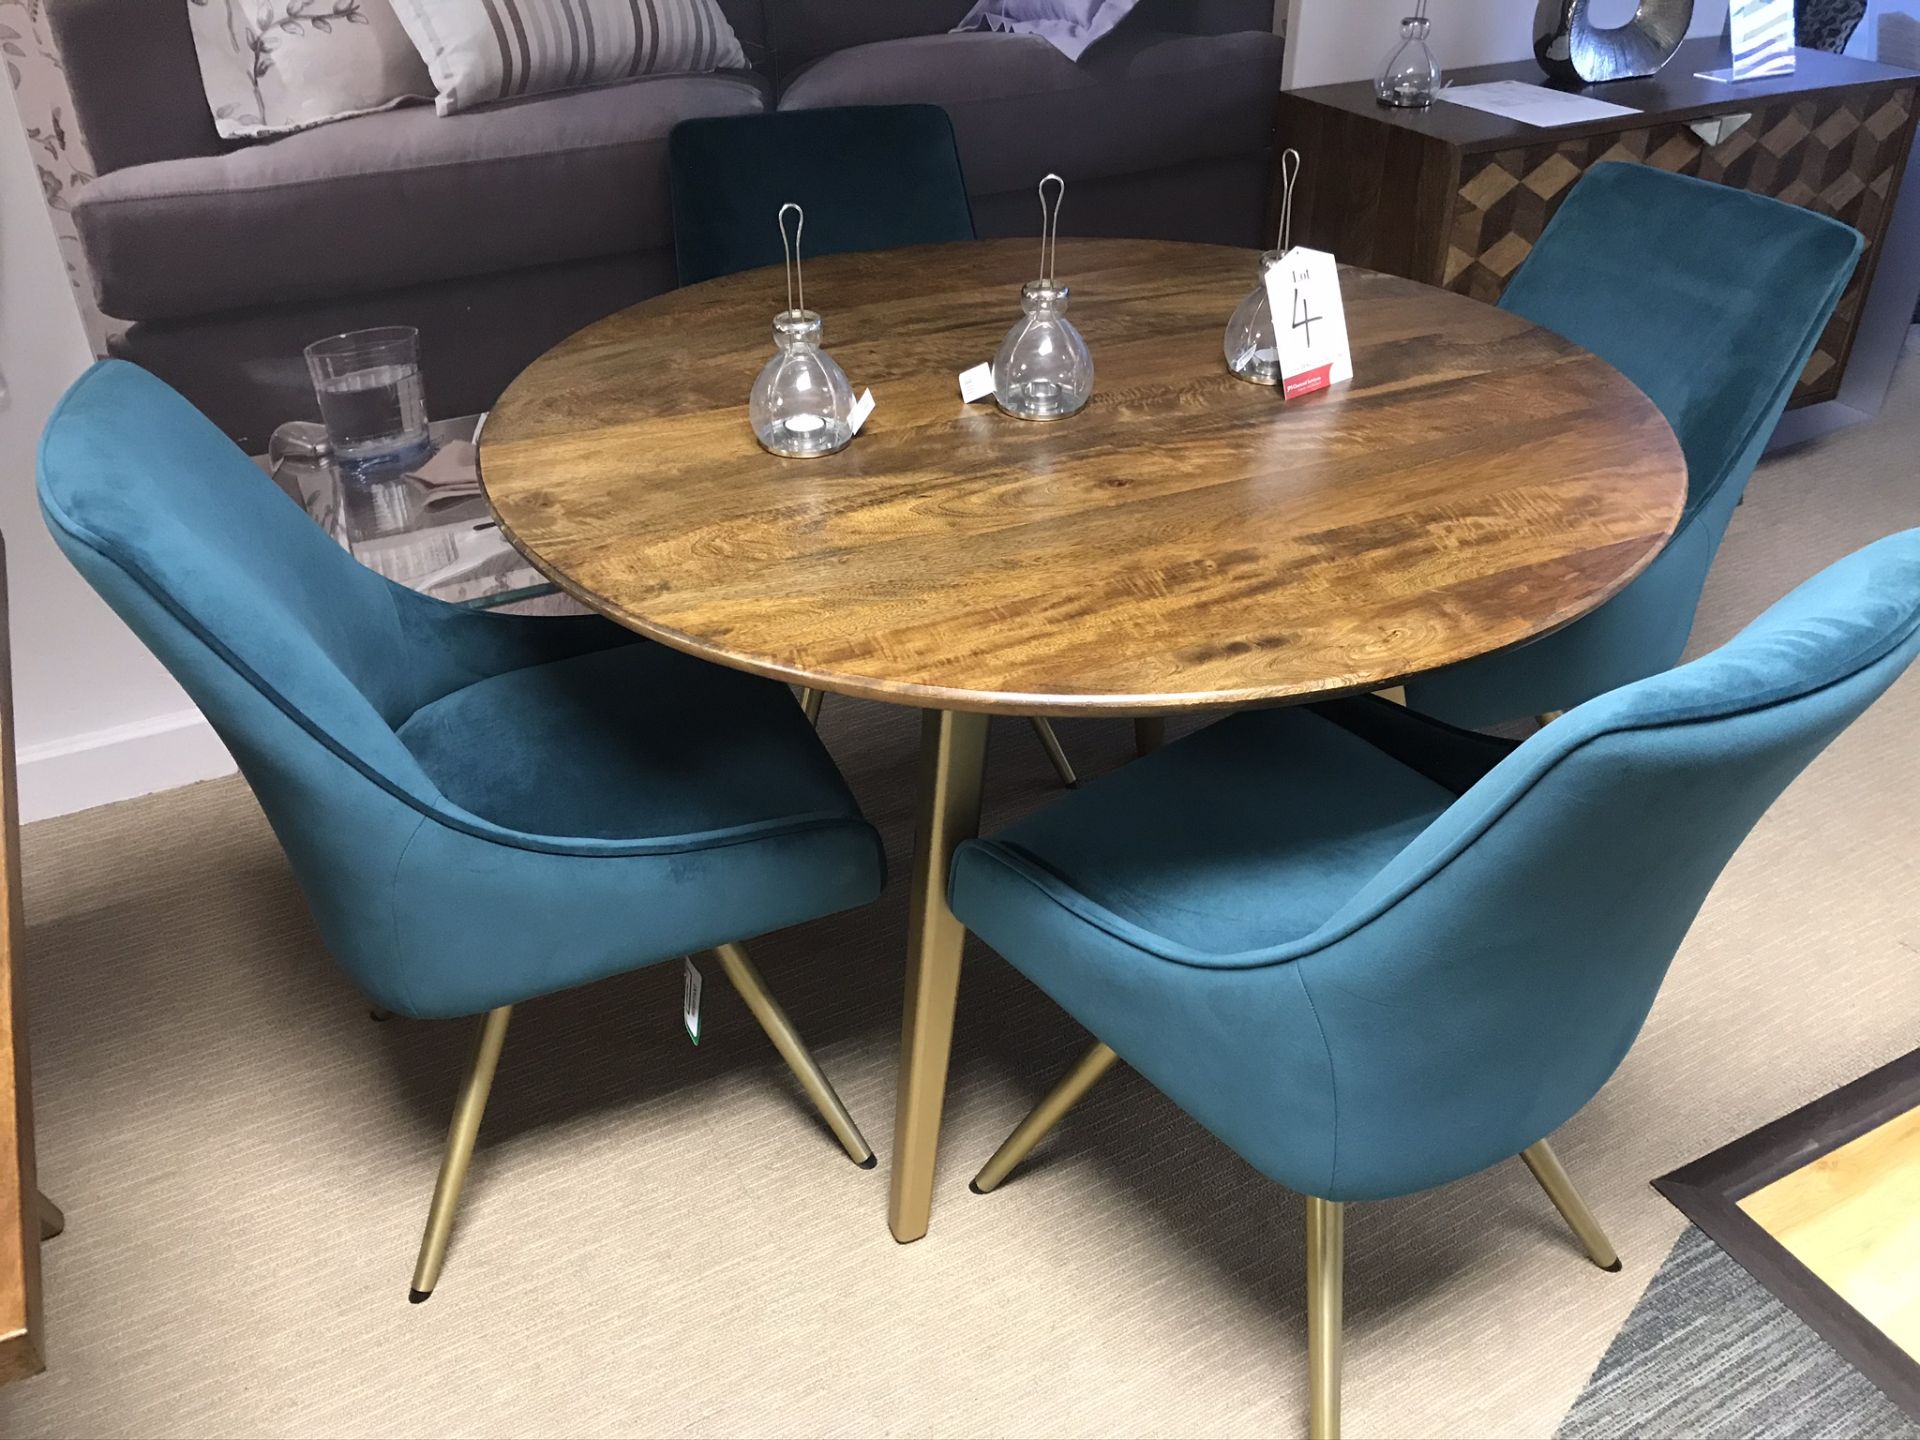 Ex Display Baker Bedford BX01 Boxer Collection 120cm Round Dining Table w/ 4 x Teal Amy Dining Chair - Image 2 of 2